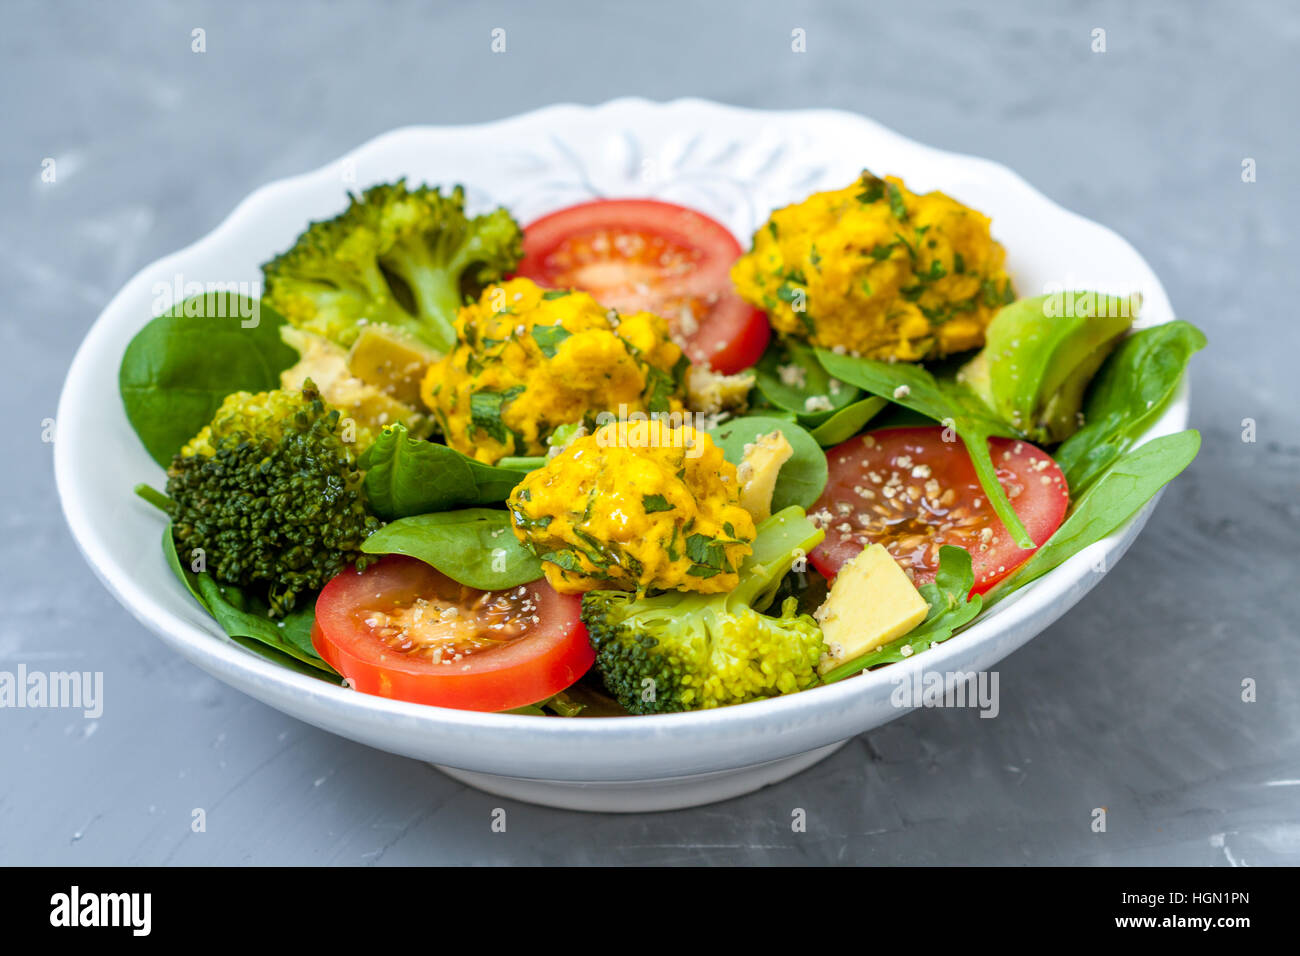 Spinach, lentil balls, avocado, tomatoes - vegan lunch. Healthy homemade vegan food content. Stock Photo